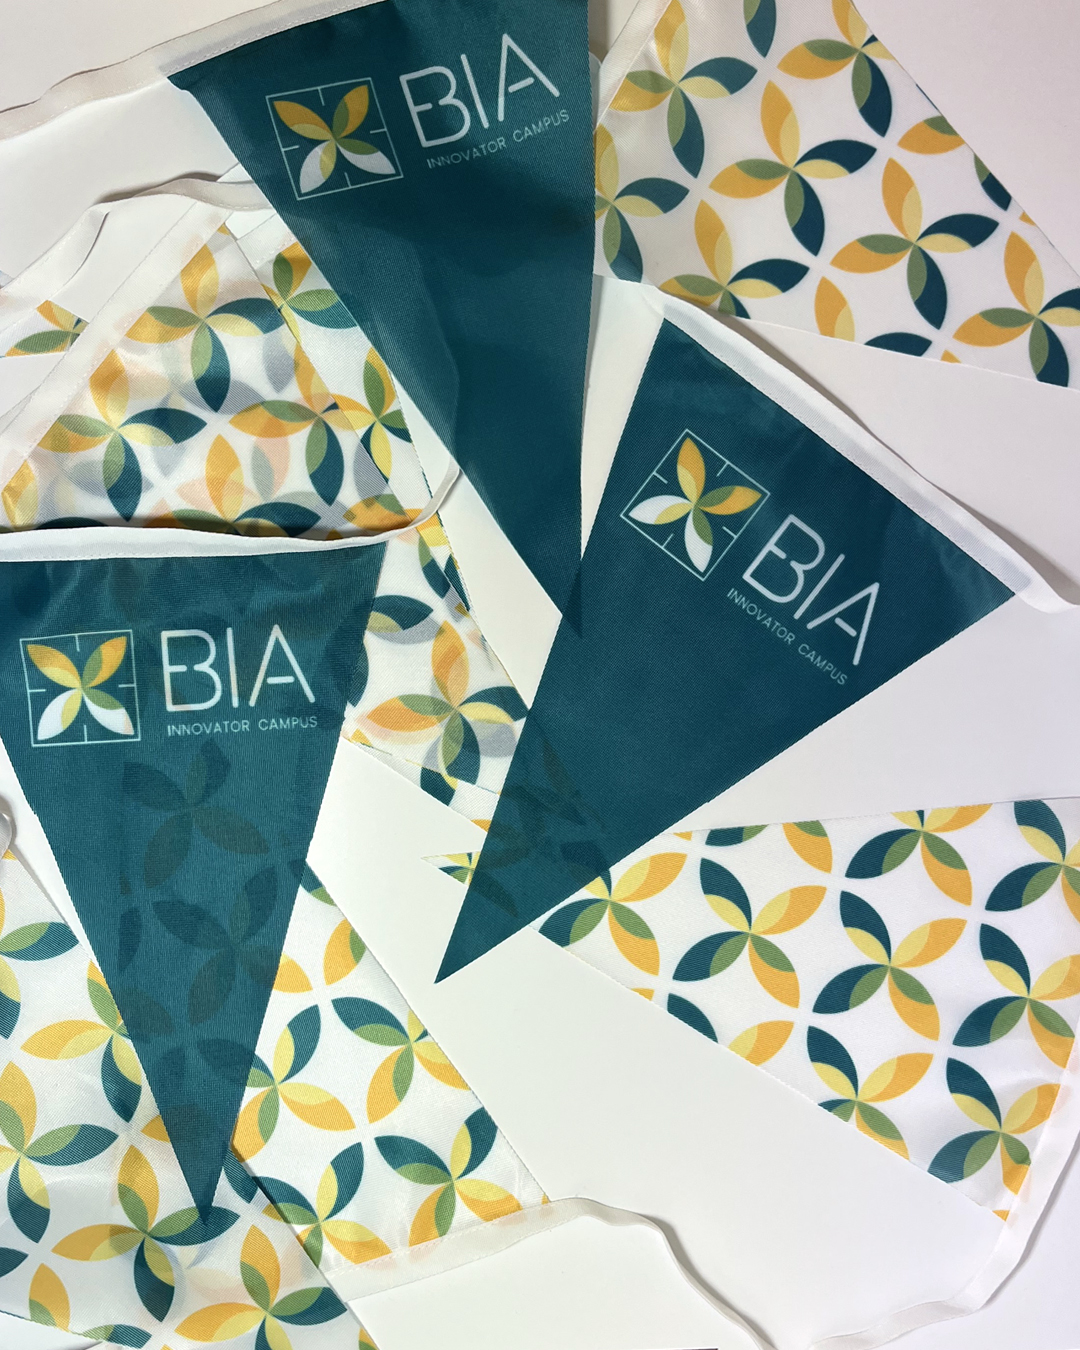 Bia innovators bunting and flags printed and customised